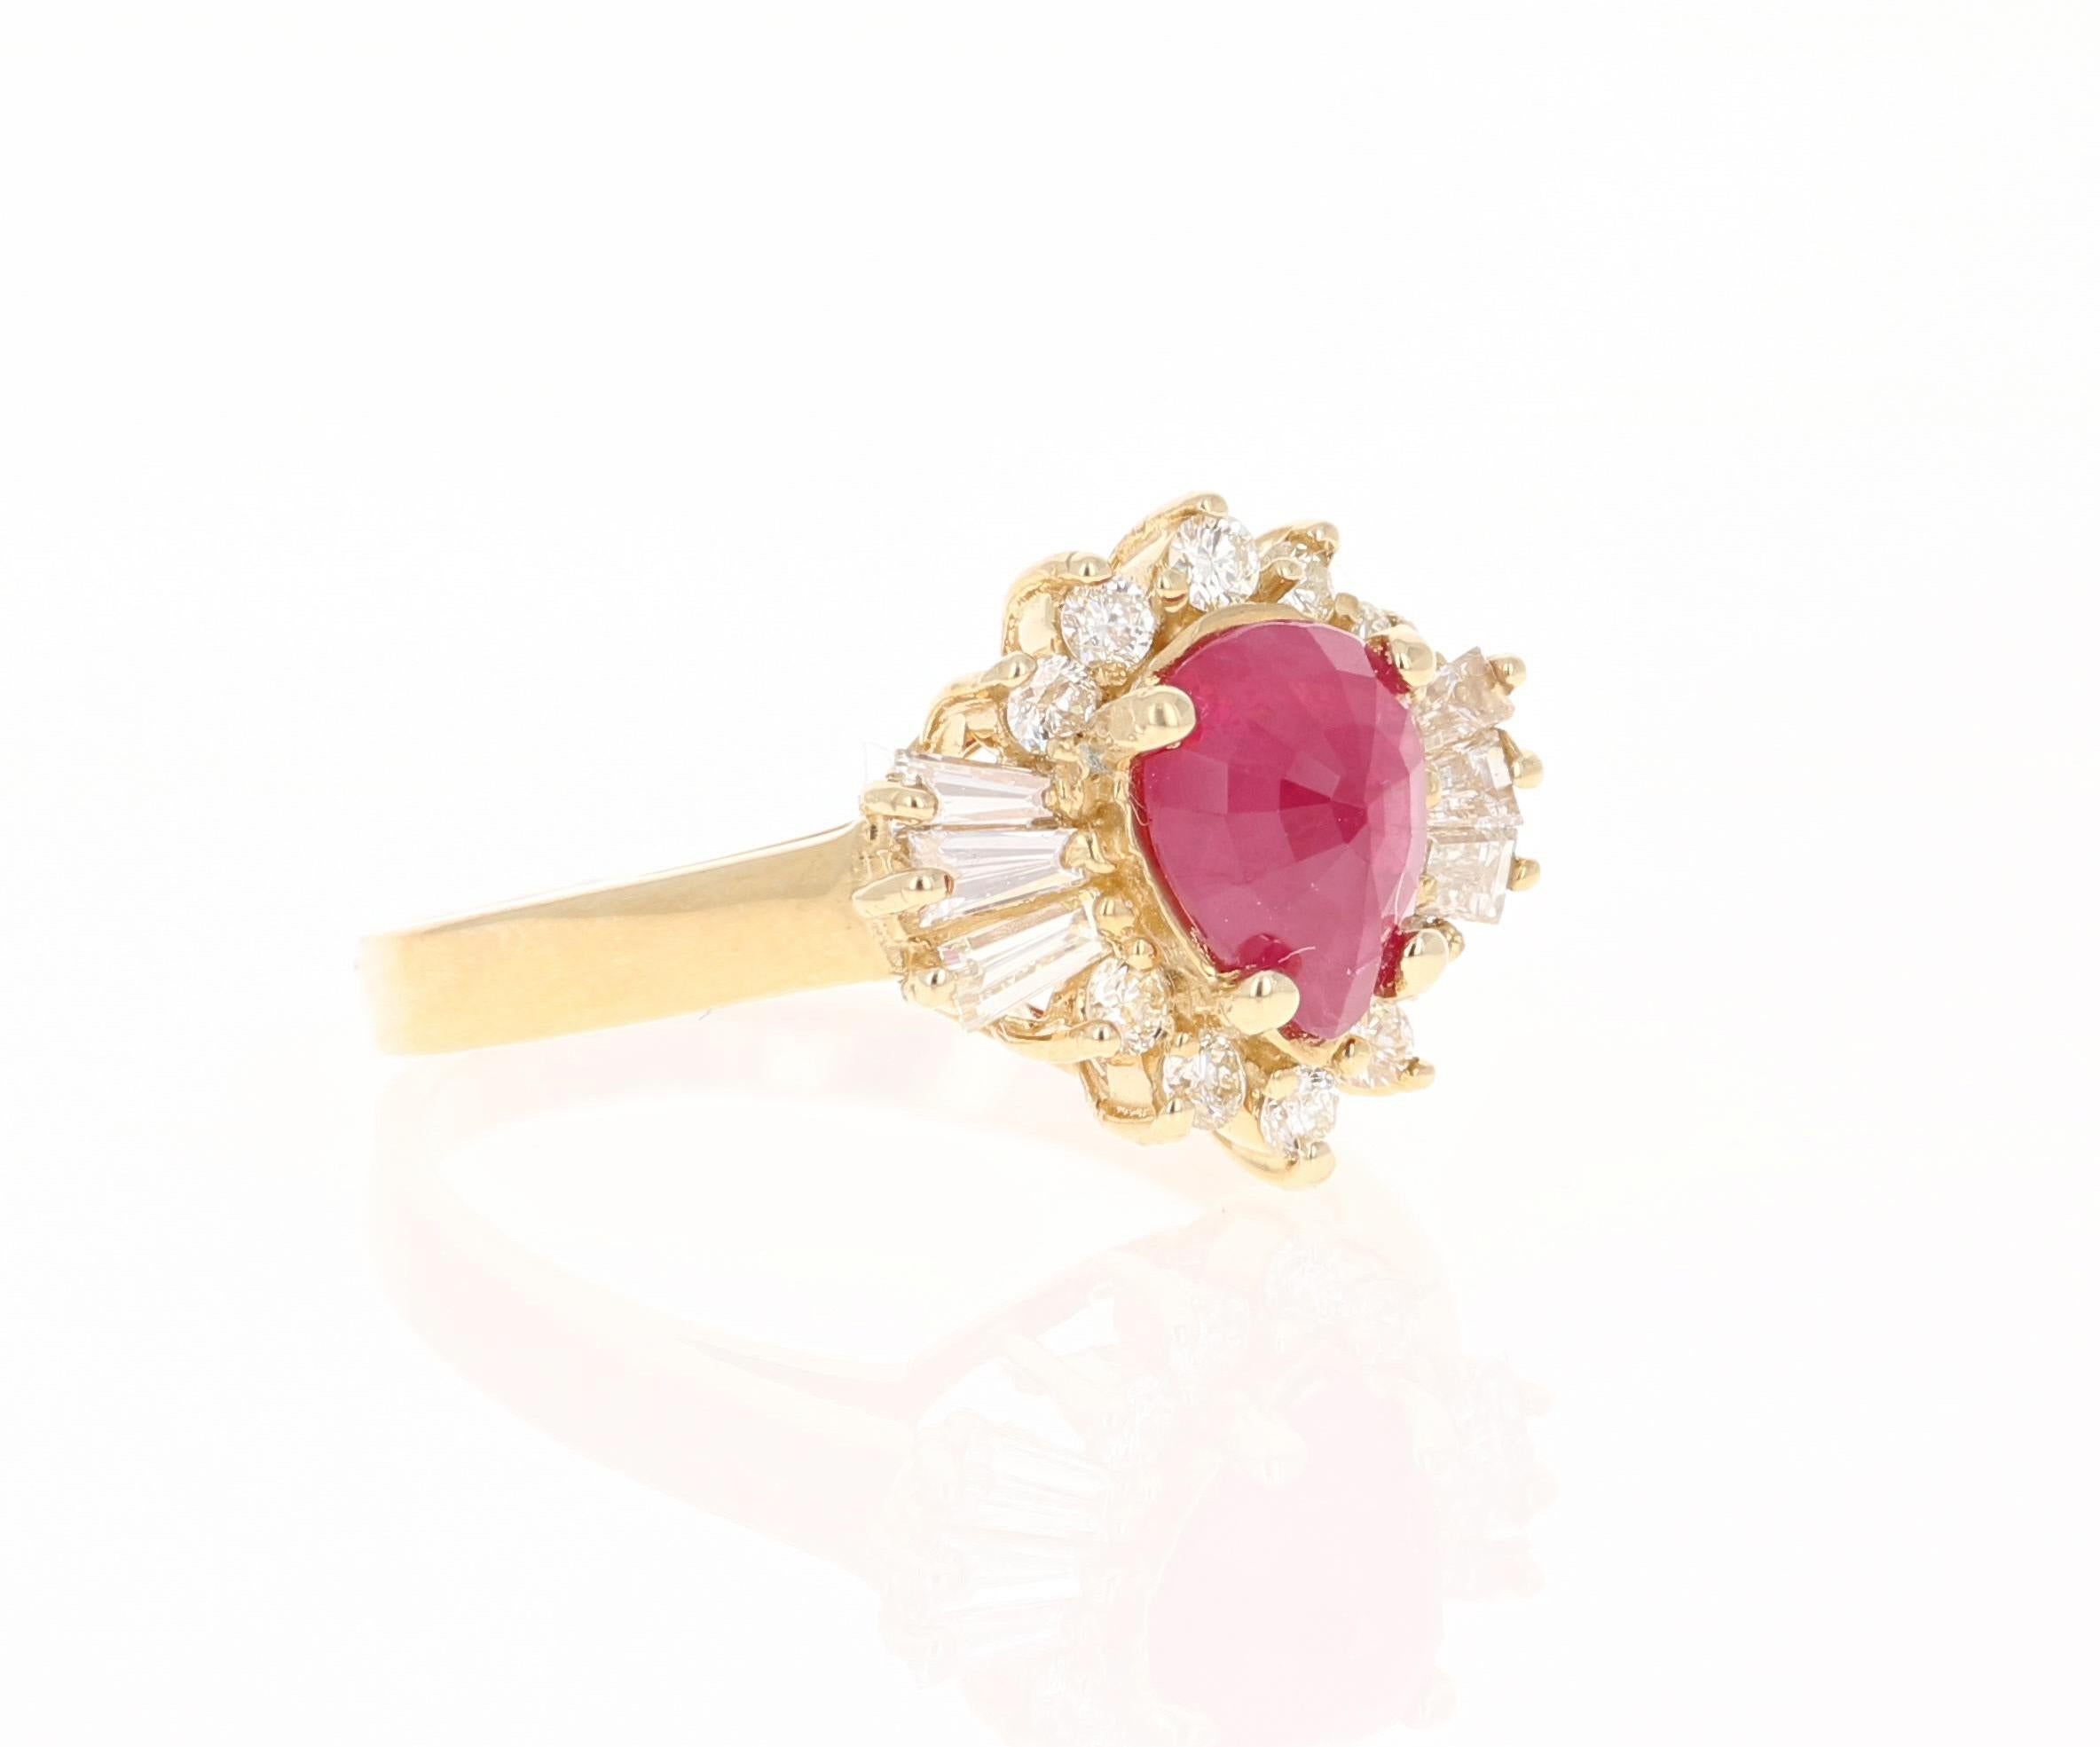 There is a Pear Cut Ruby set in the center of the ring that weighs 1.36 Carats.  There are also 10 Round Cut Diamonds that weigh 0.27 Carats (Clarity: VS, Color: H) and 6 Baguette Cut Diamonds that weigh 0.31 Carats.  (Clarity: VS, Color: H)  The